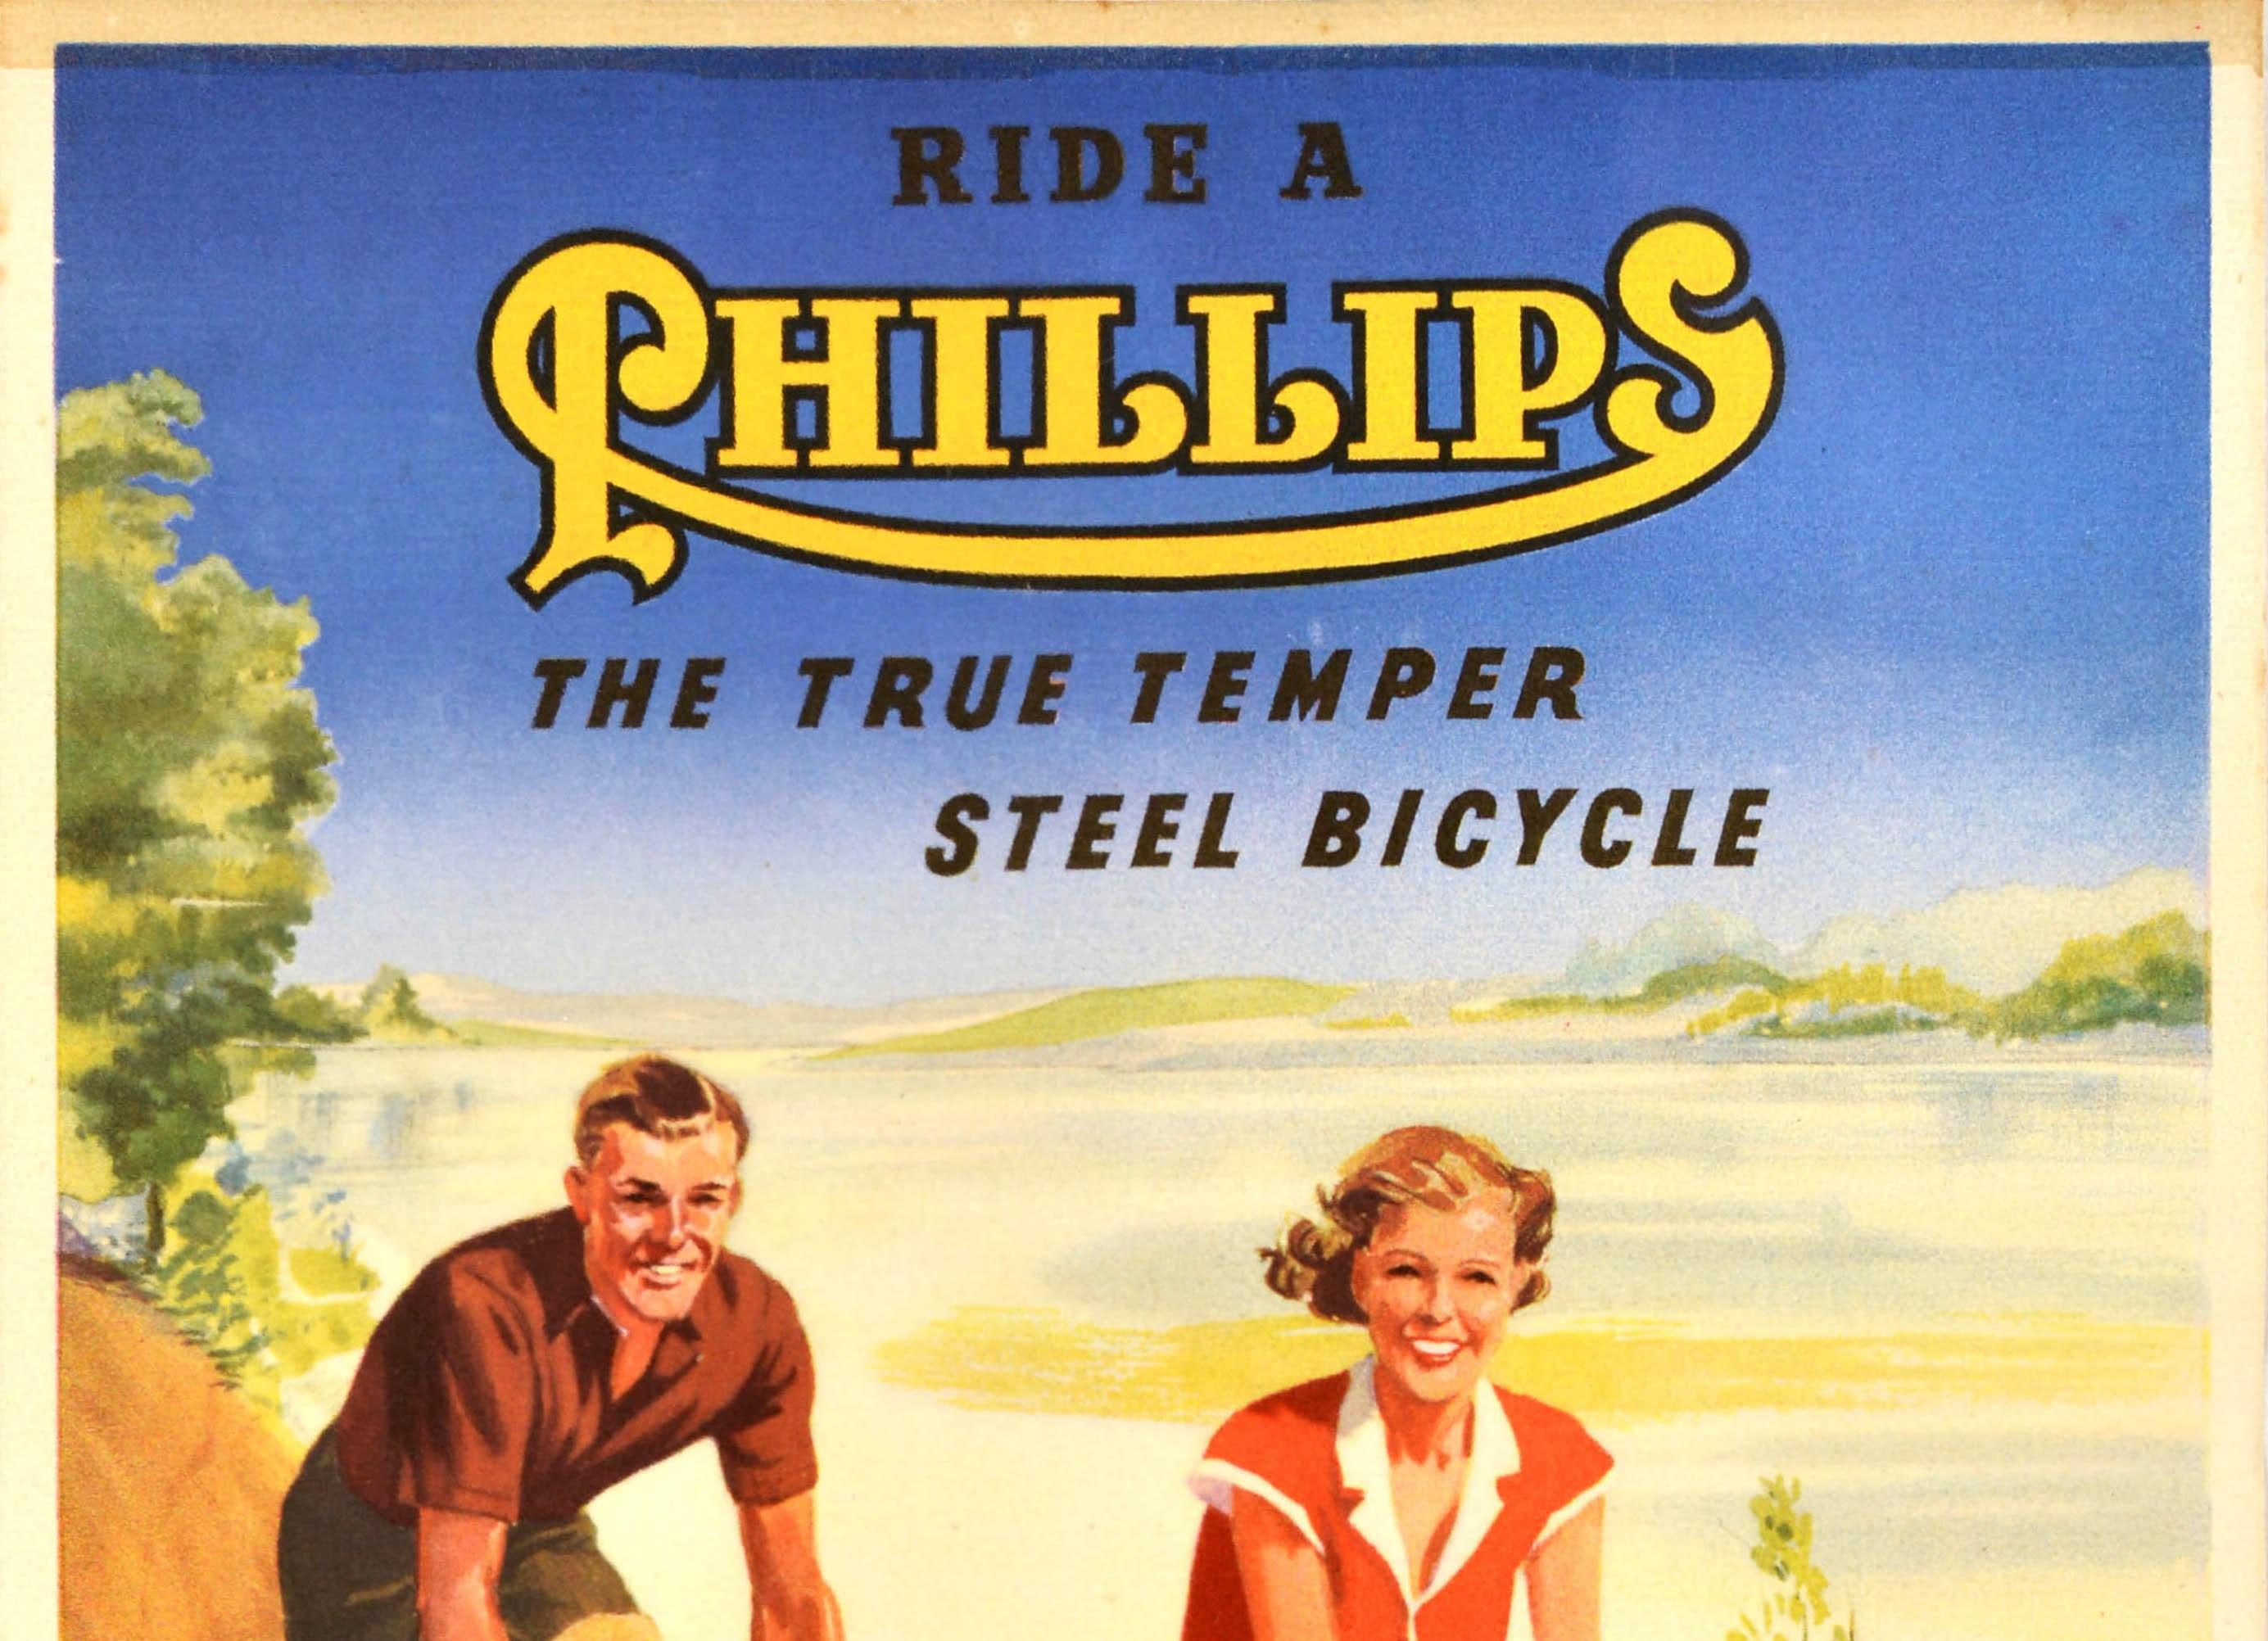 Original vintage bike advertising poster - Ride a Phillips The true temper steel bicycle - featuring an illustration of a smiling couple cycling downhill at speed along the side of a lake with trees and hills in the distance, the lady on a shiny new